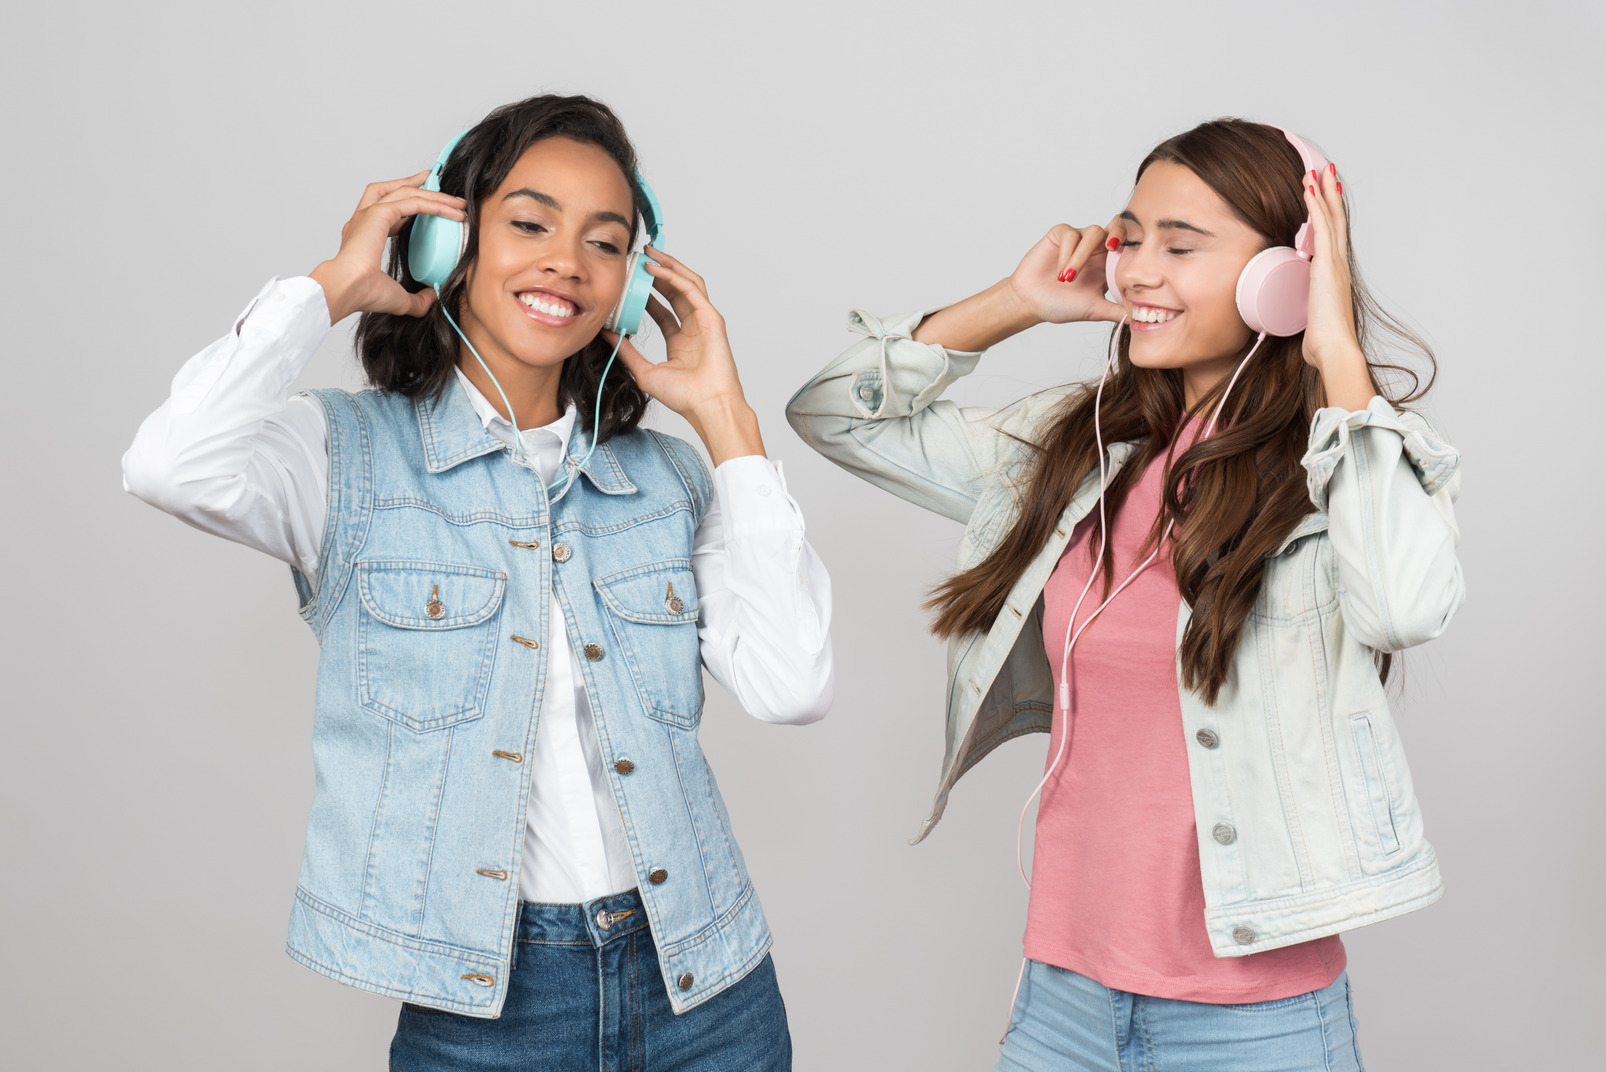 Two young women listening to music and dancing 